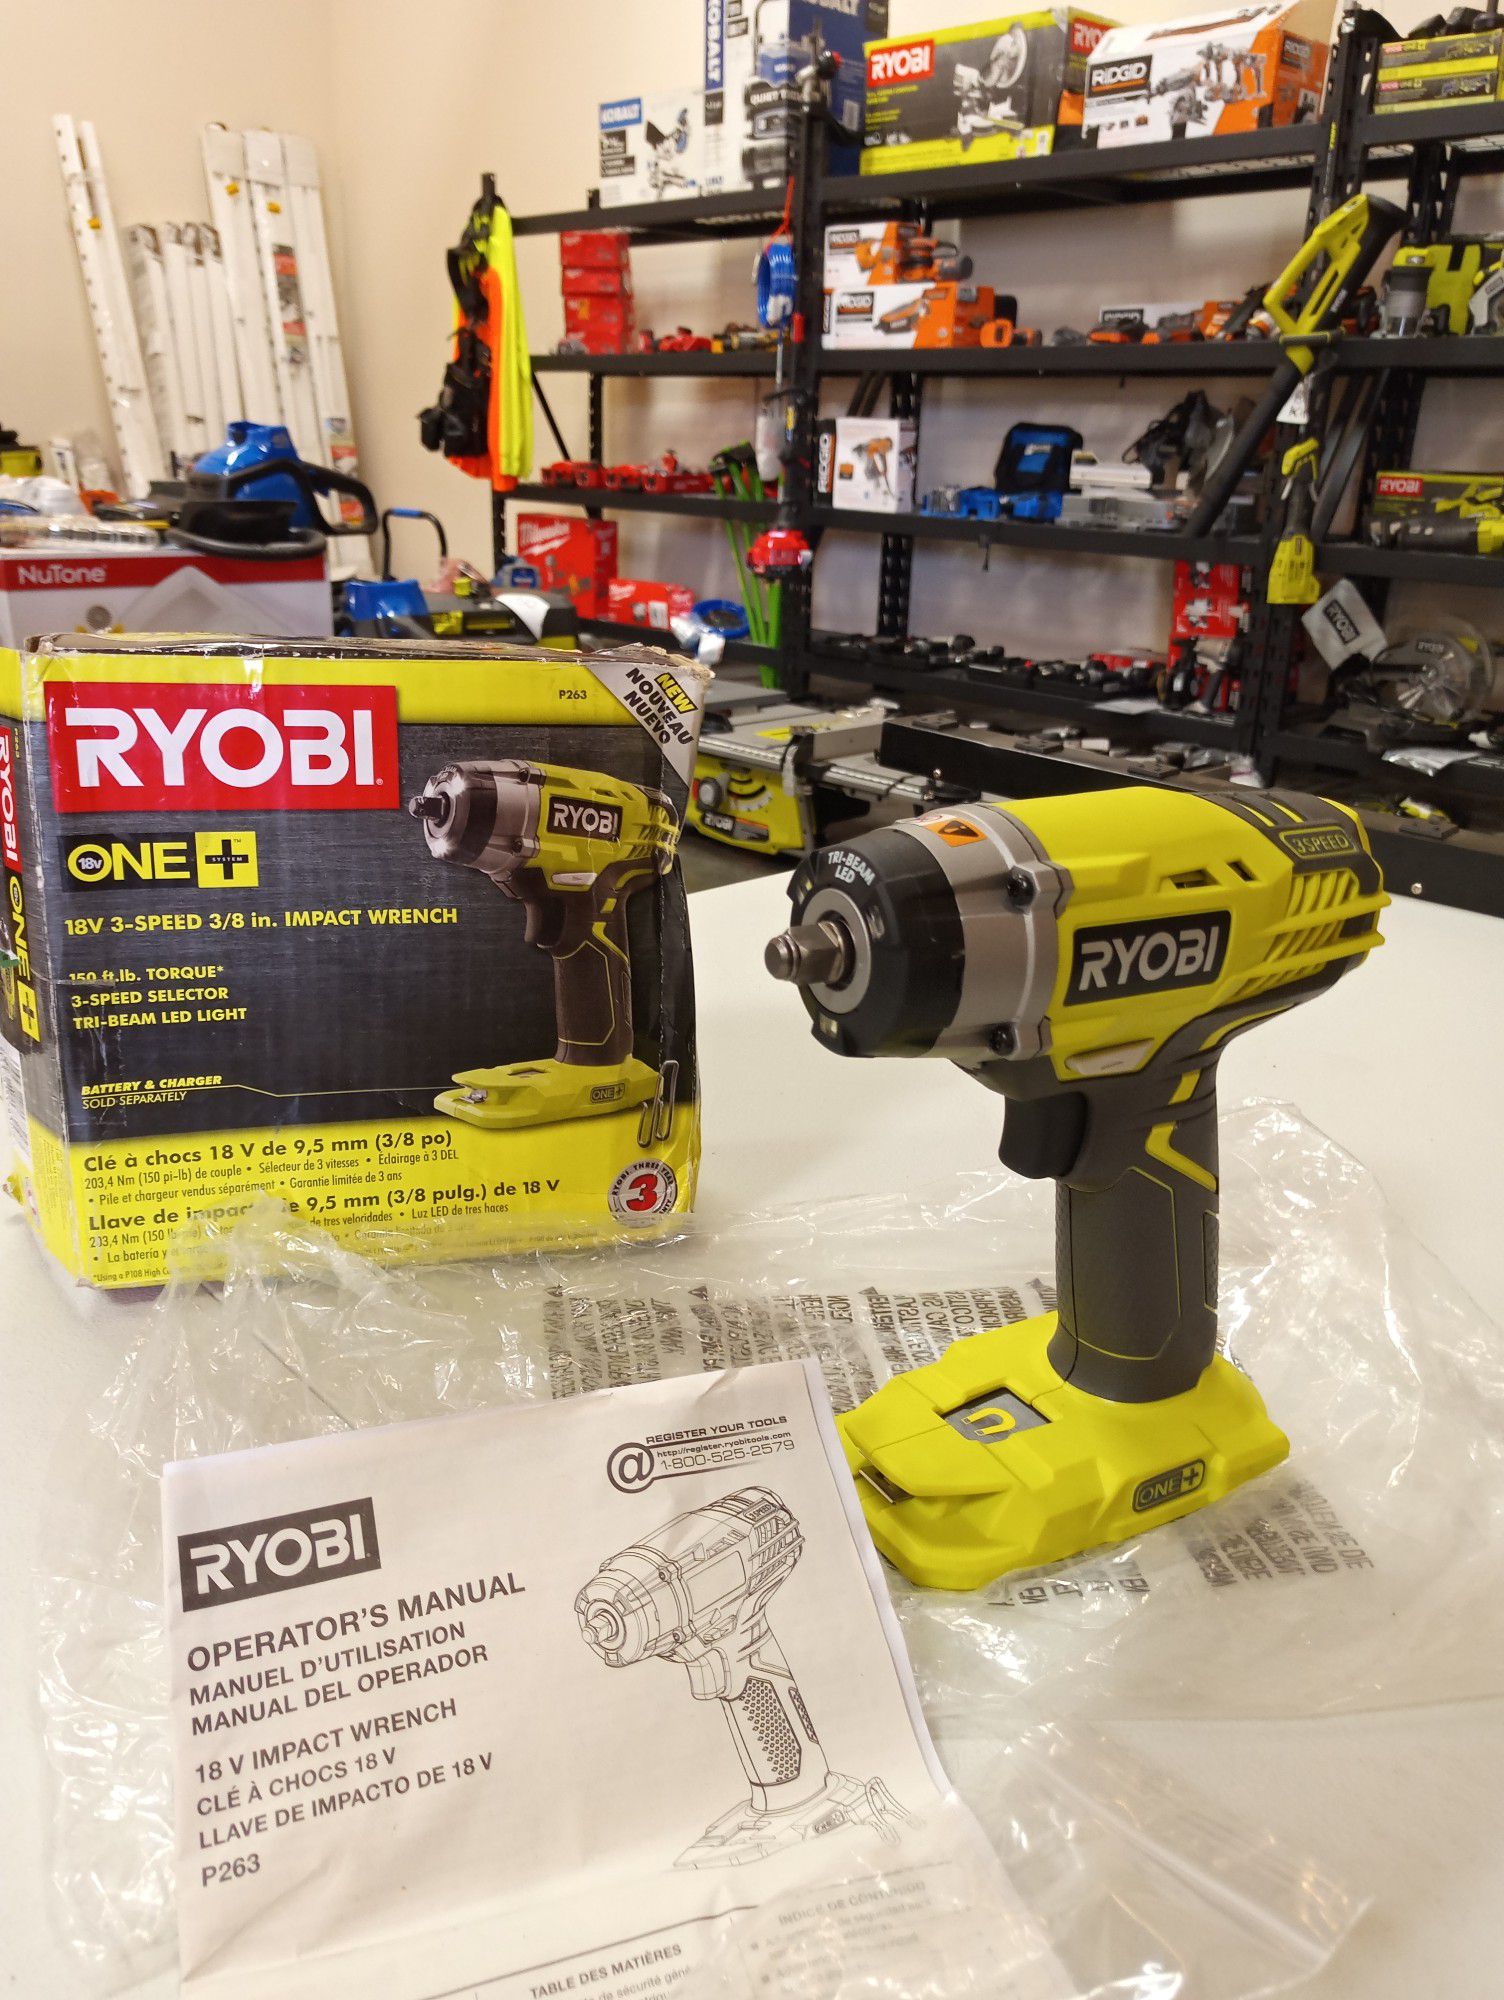 NEW RYOBI 18 VOLT 3 SPEED 3/8" IMPACT WRENCH 150 FT LB TORQUE (TOOL ONLY)!